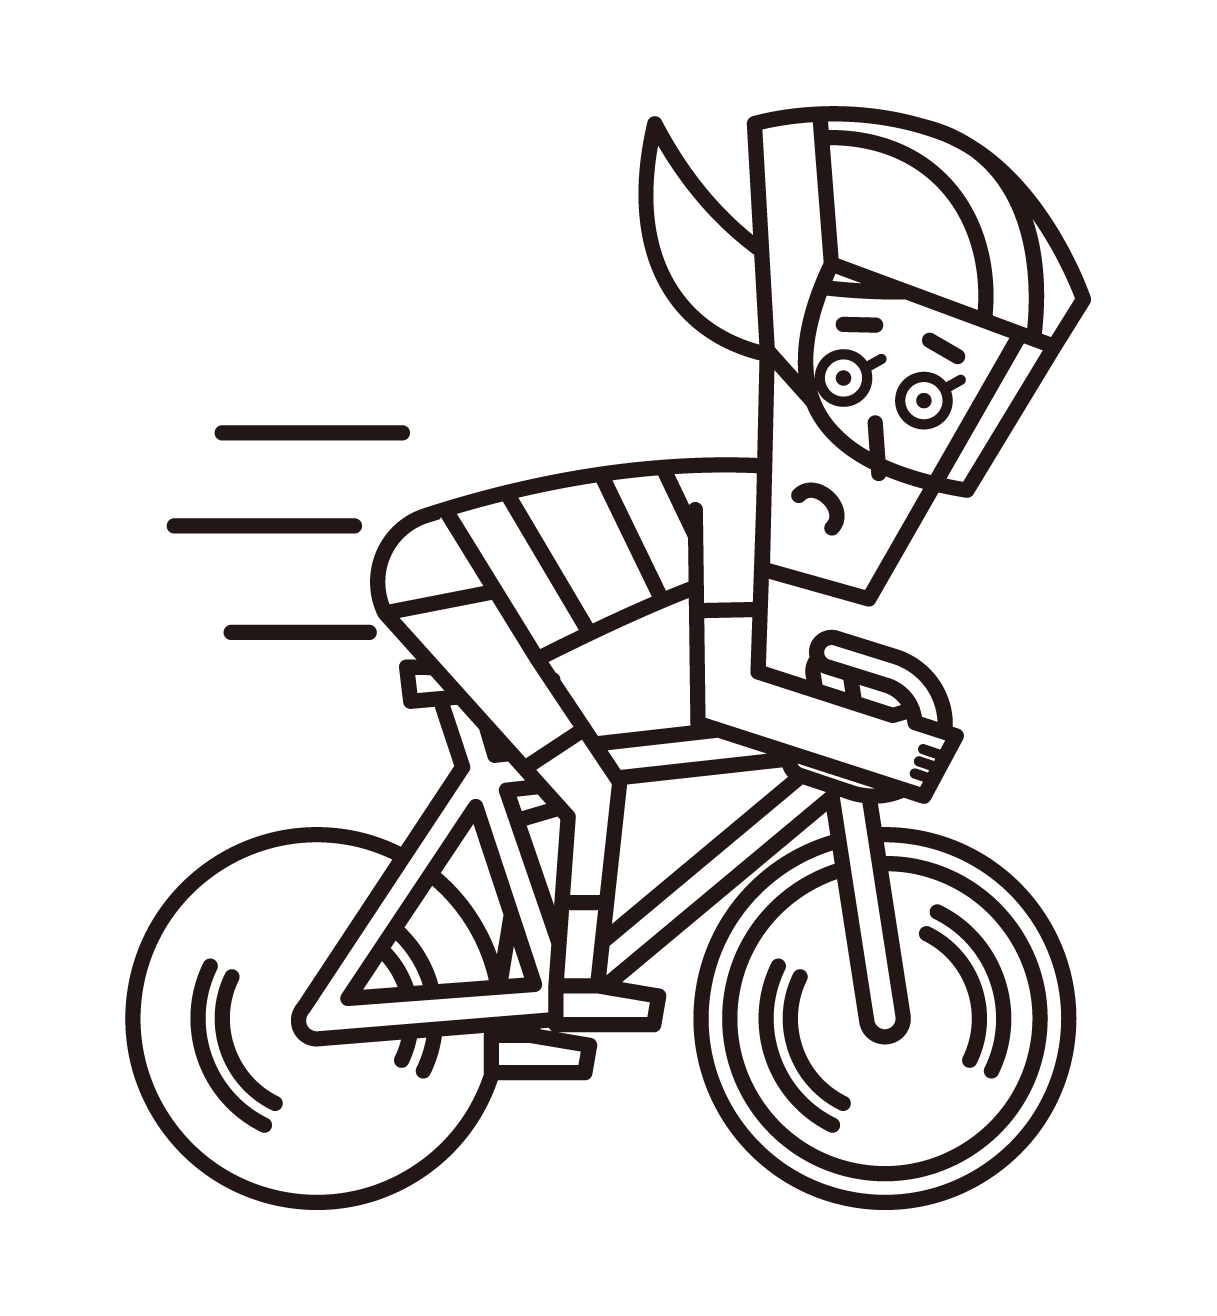 Illustration of a sprinter (female cycling track athlete)